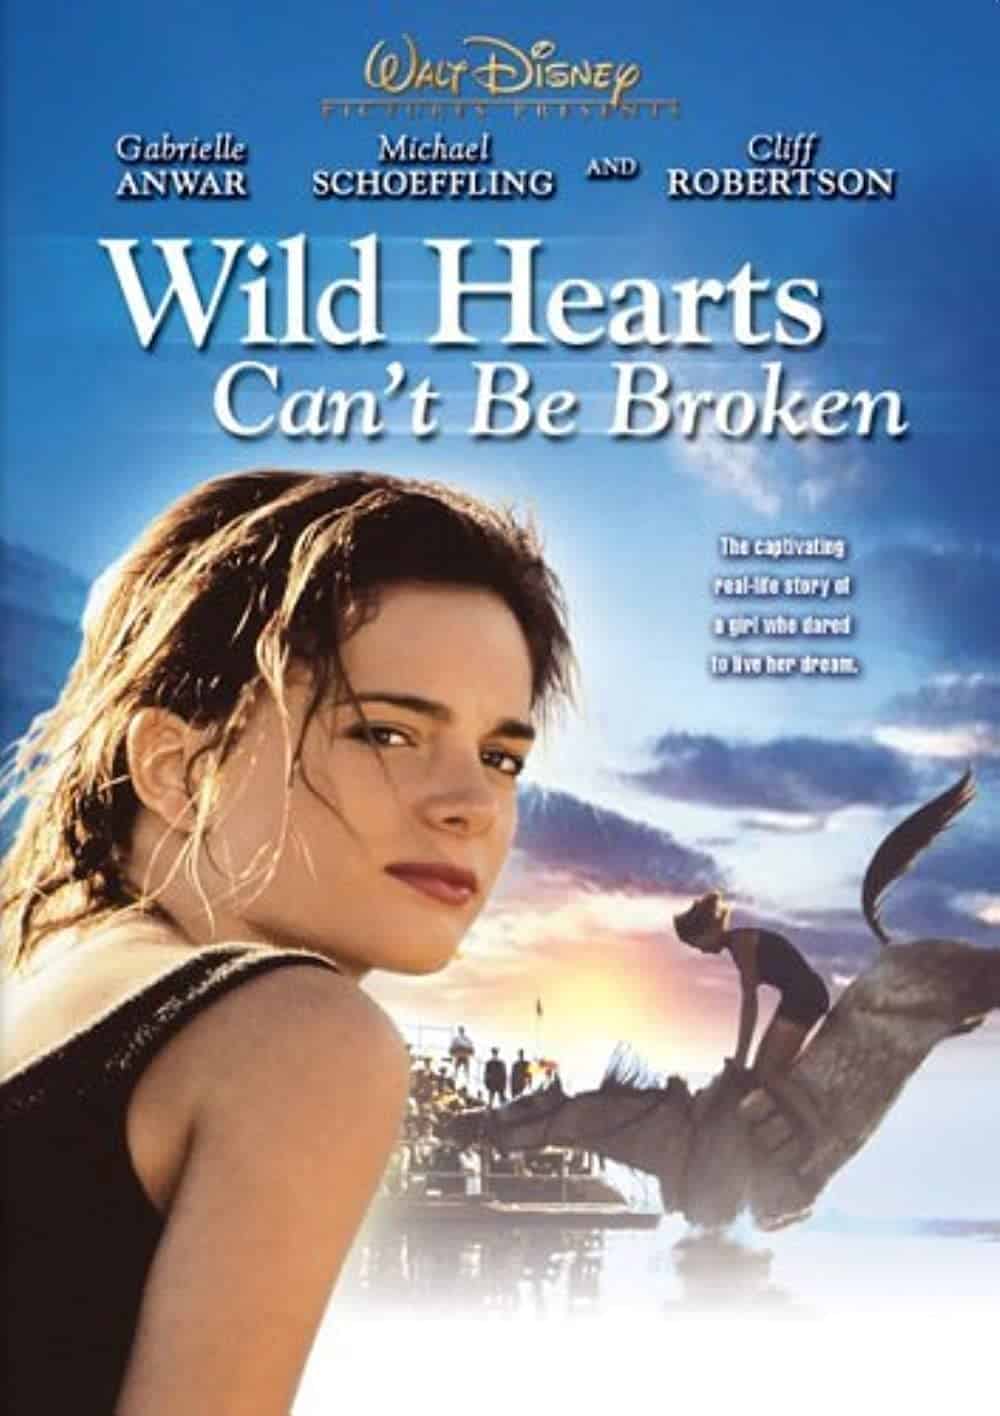 25 Best Horse Movies You Should Totally Watch – Wild Hearts Can’t Be Broken